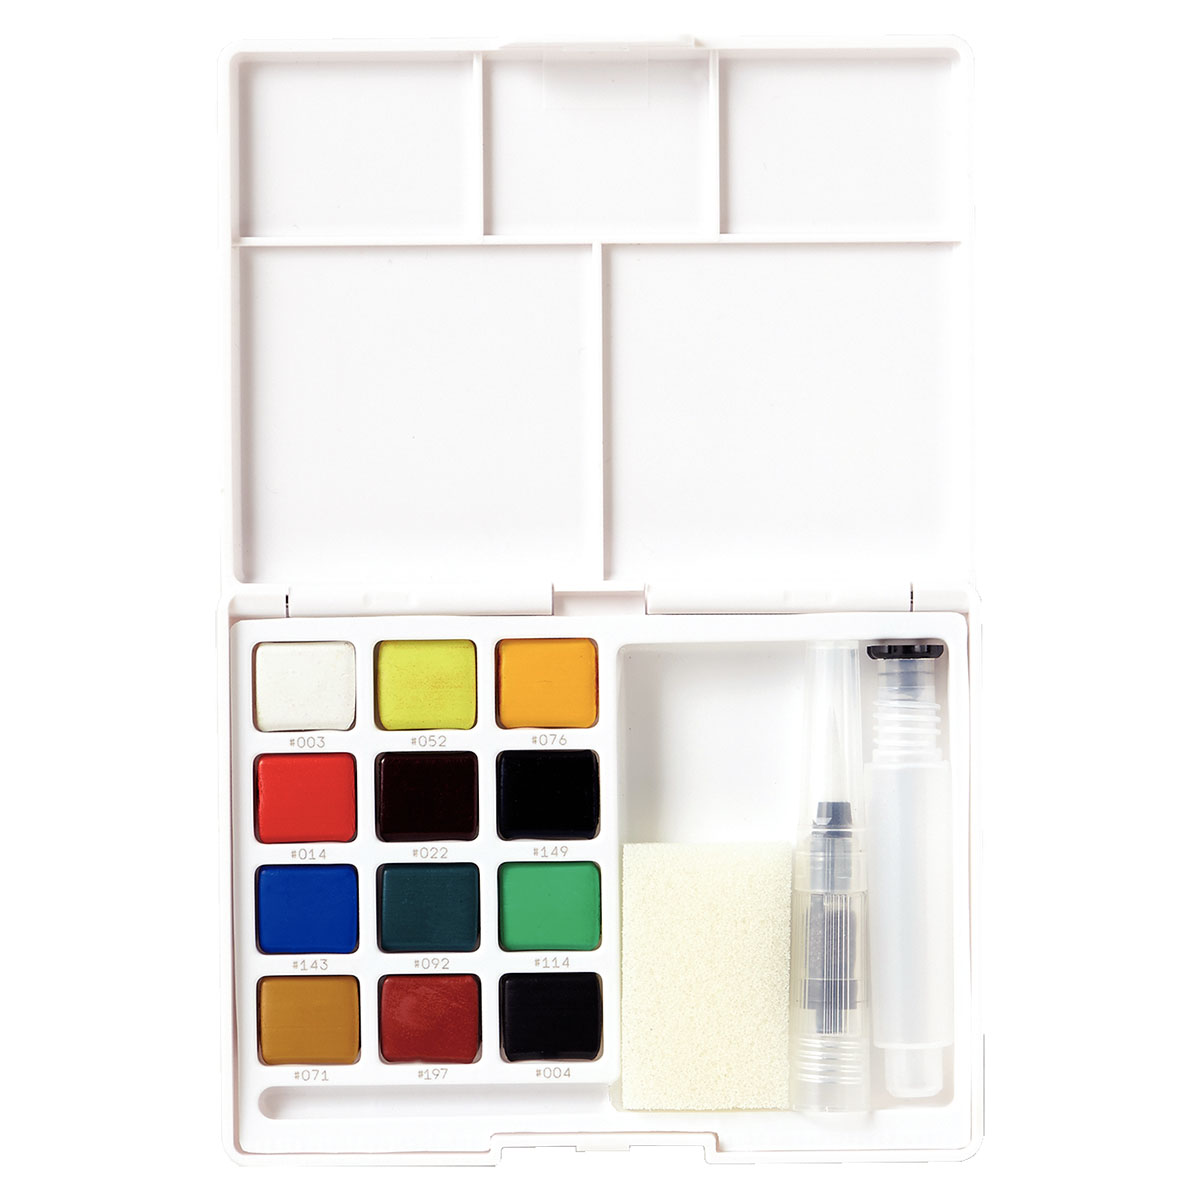 Koi Water Colors Pocket Field Sketch Box 12 + Brush in the group Art Supplies / Colors / Watercolor Paint at Pen Store (125610)